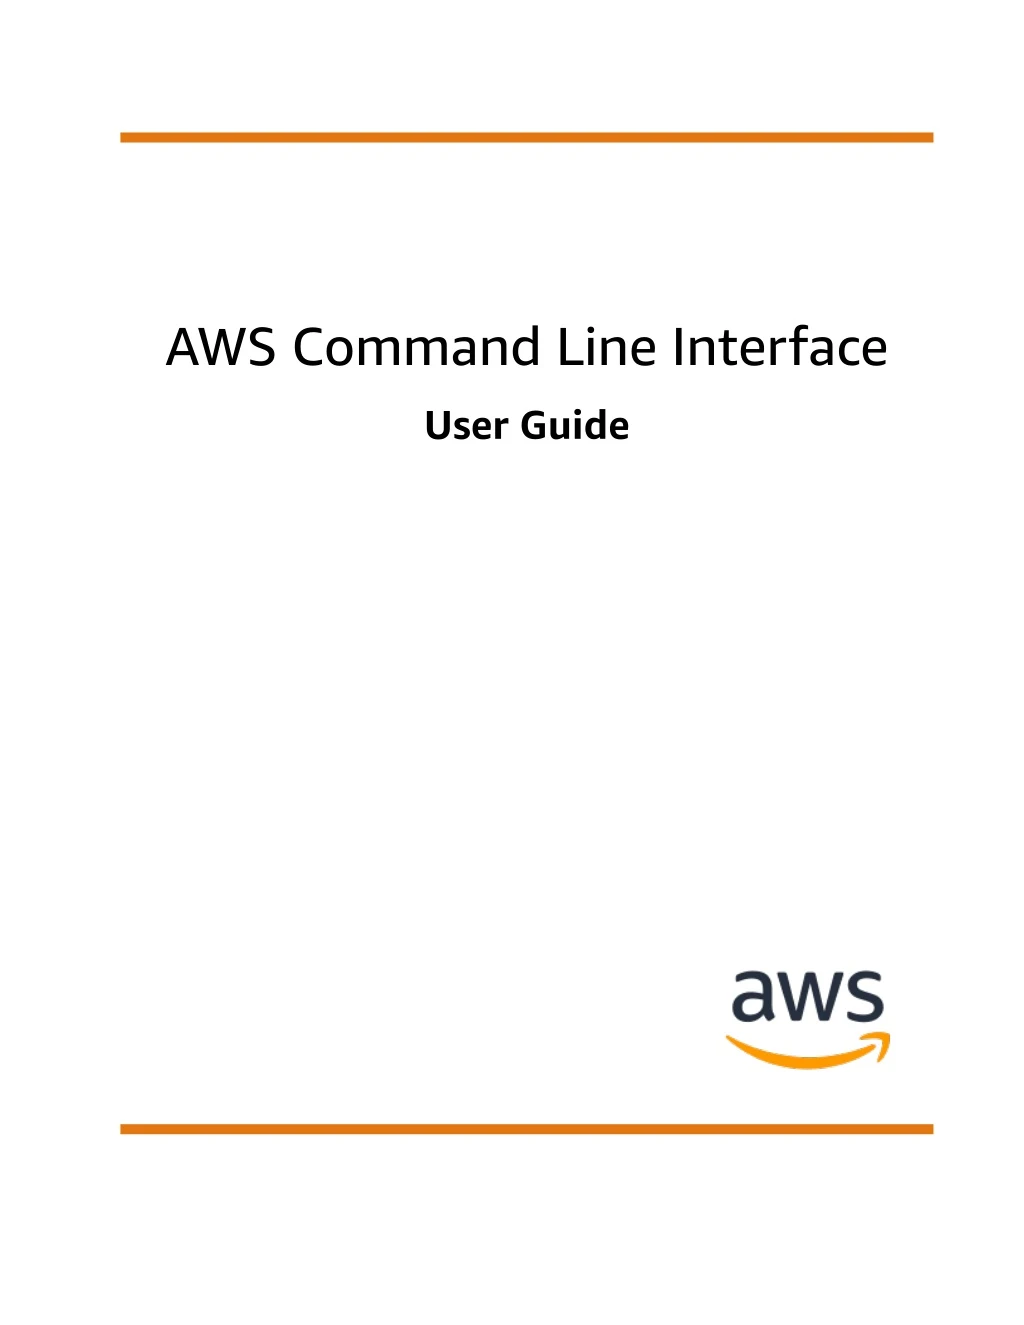 aws command line interface